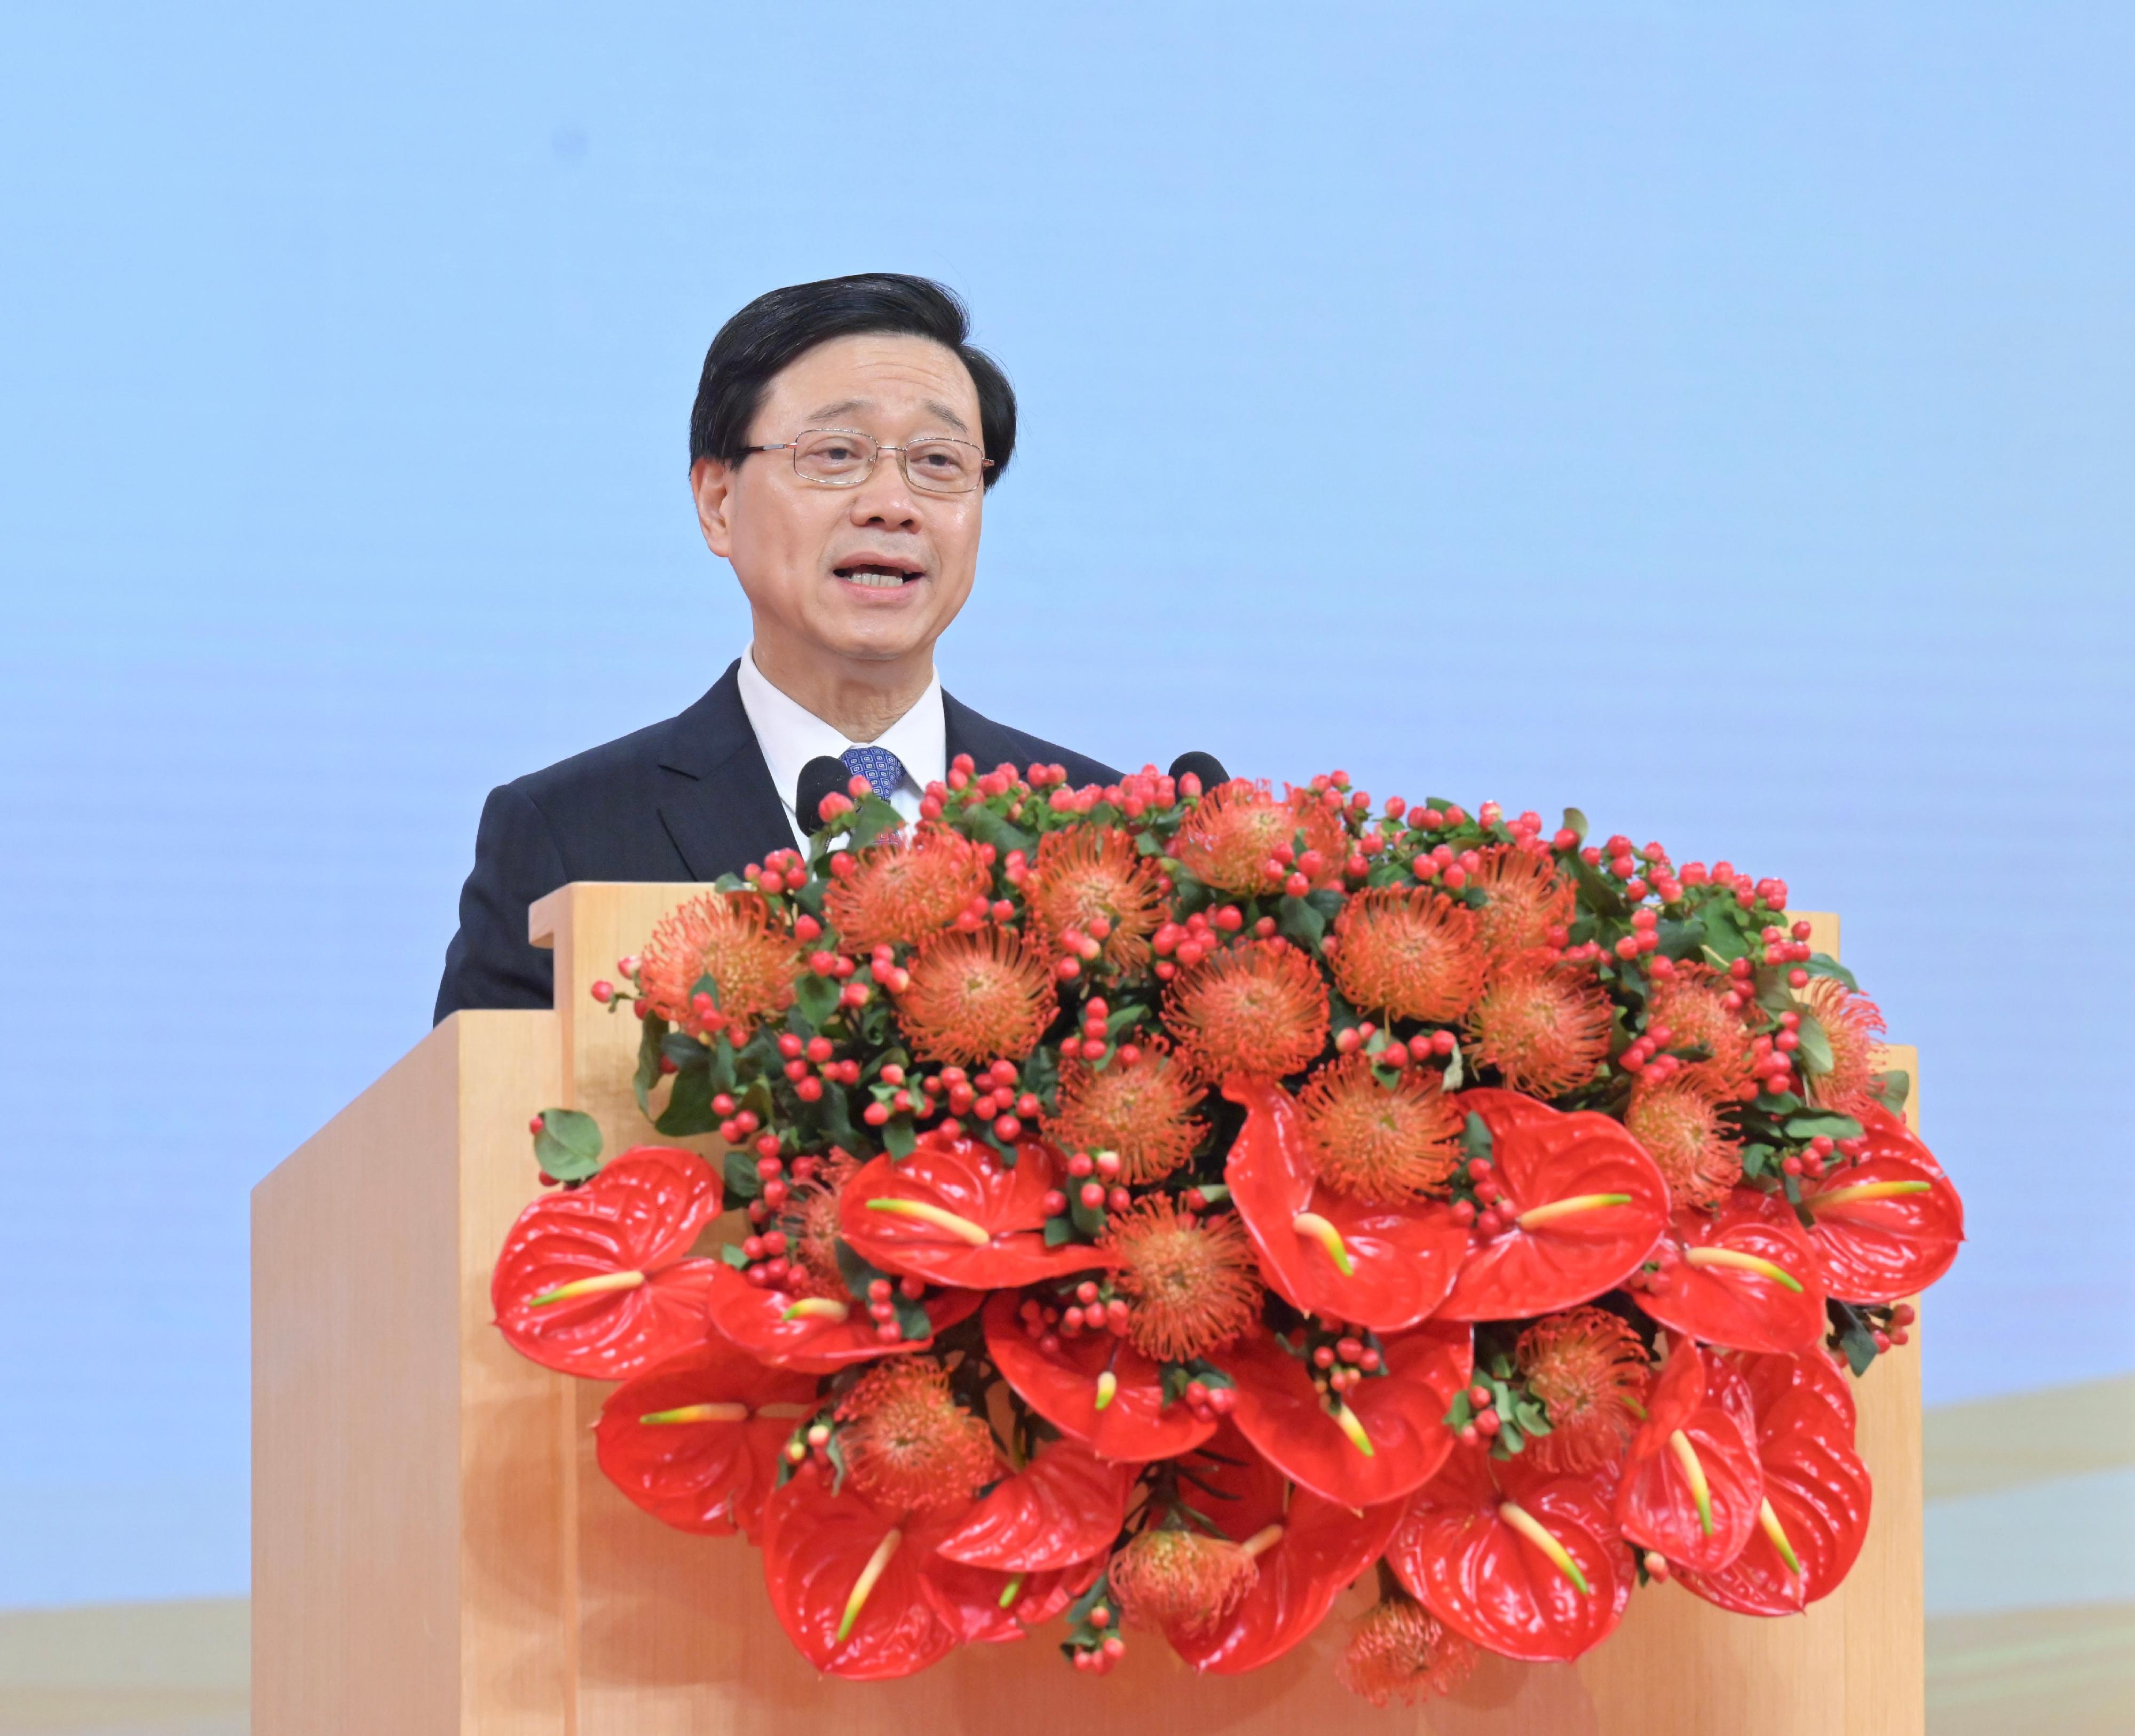 The Chief Executive, Mr John Lee, together with Principal Officials and guests, attended the reception for the 26th anniversary of the establishment of the Hong Kong Special Administrative Region at the Hong Kong Convention and Exhibition Centre this morning (July 1). Photo shows Mr Lee addressing the reception.